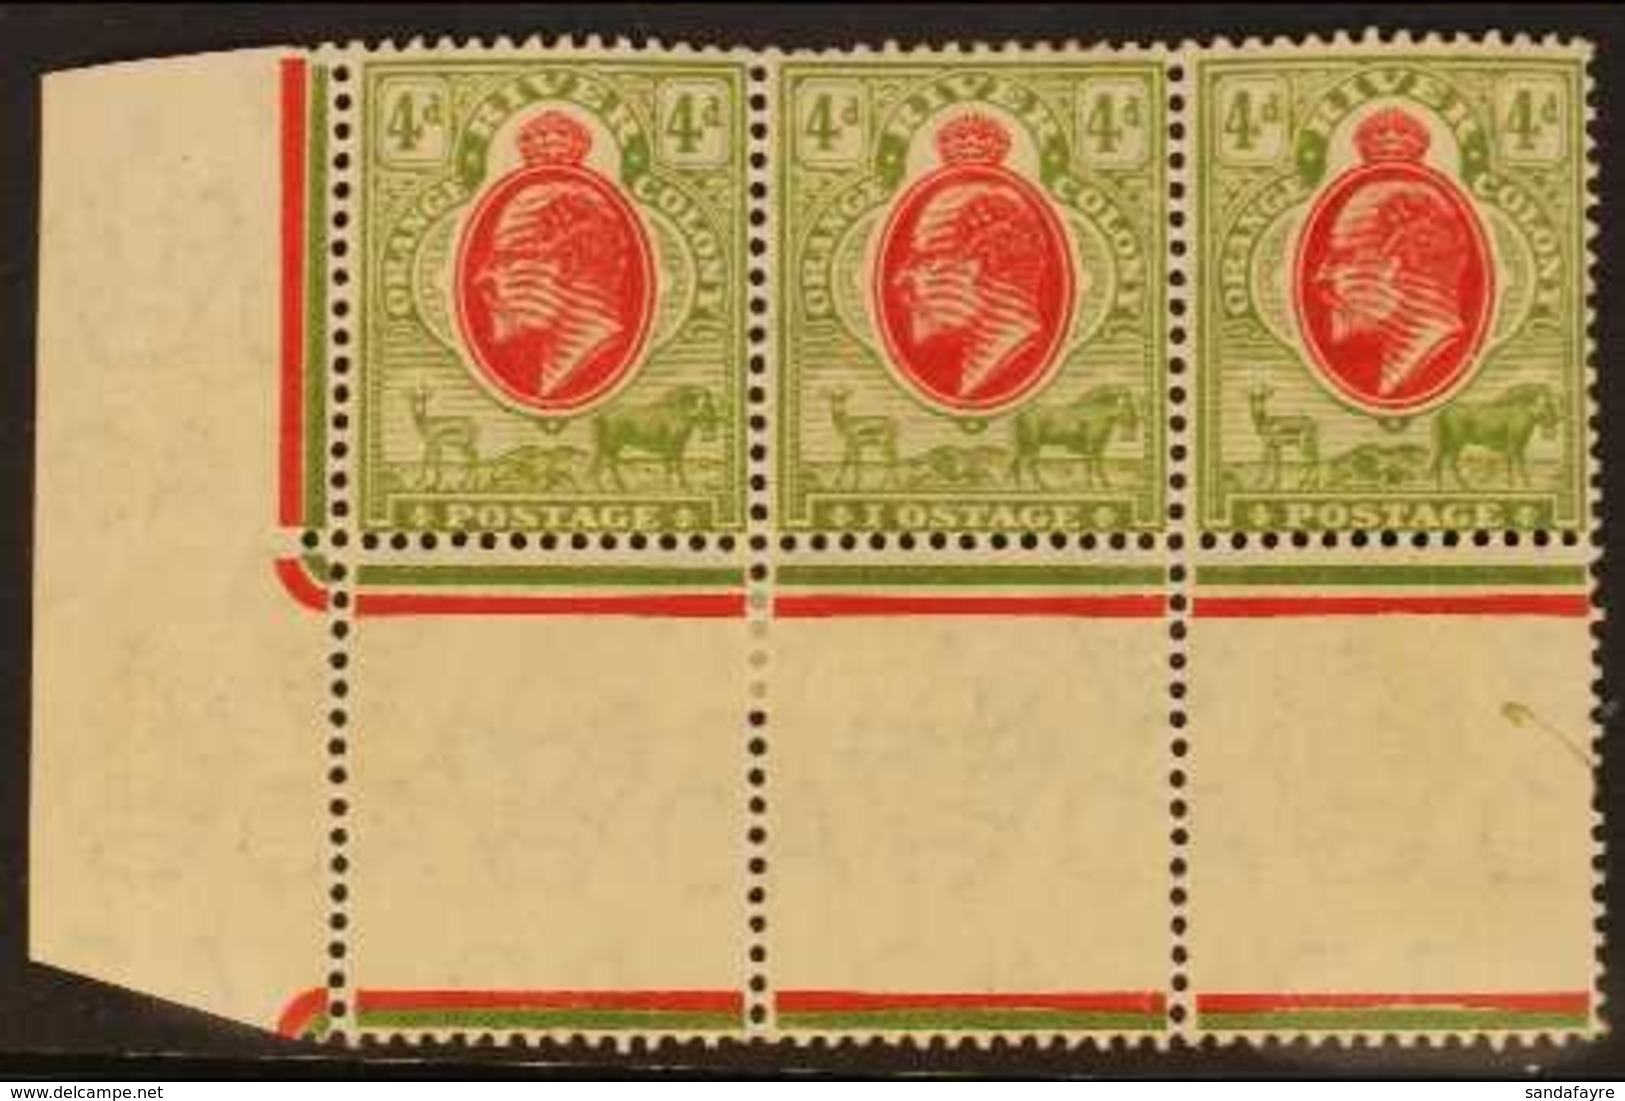 ORANGE FREE STATE 1905 4d Scarlet And Sage-green Corner Strip Of Three With Central Stamp Having The "I OSTAGE", SG 150+ - Unclassified